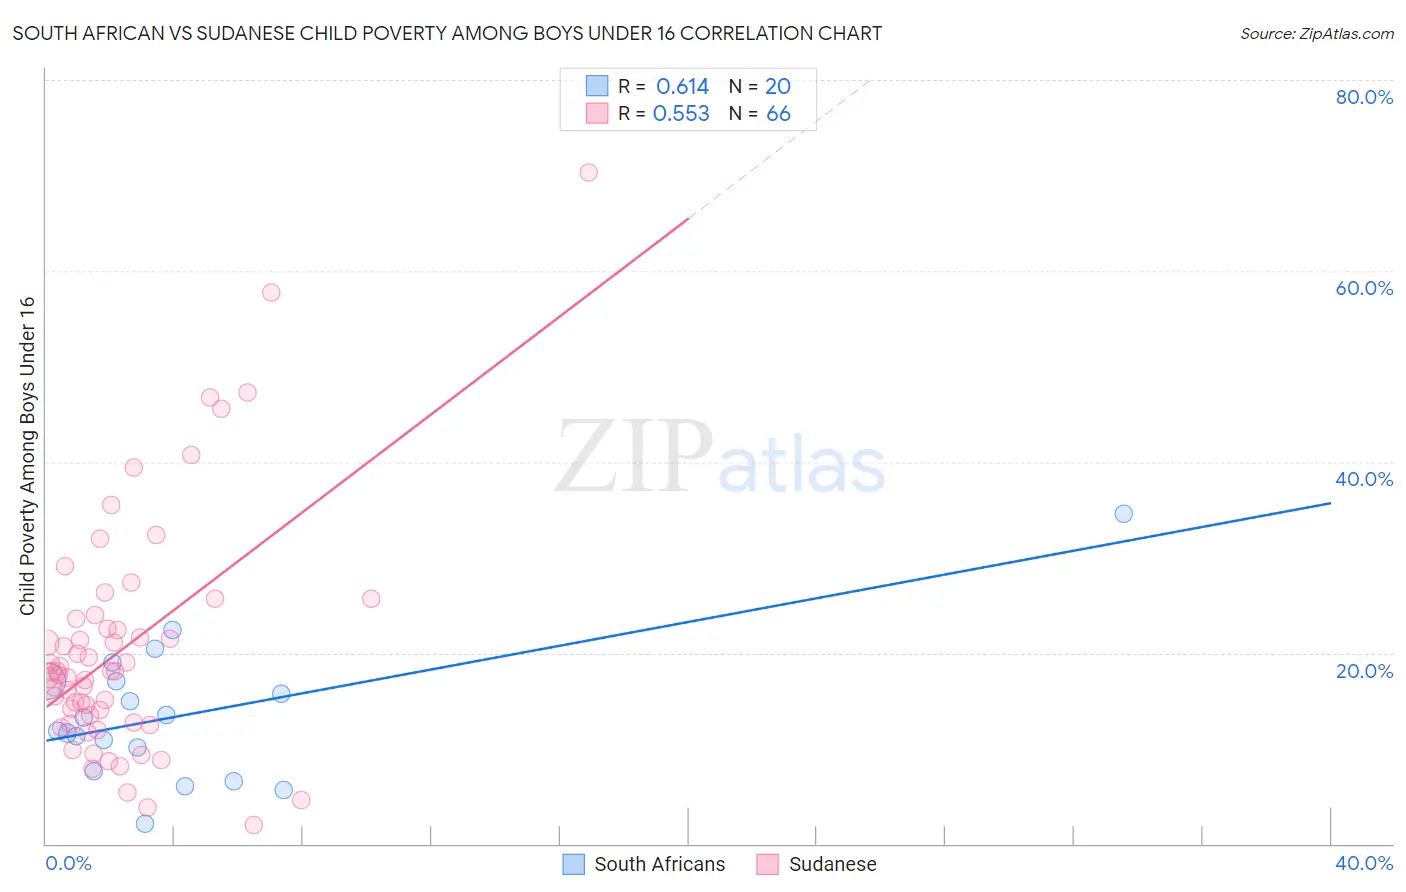 South African vs Sudanese Child Poverty Among Boys Under 16